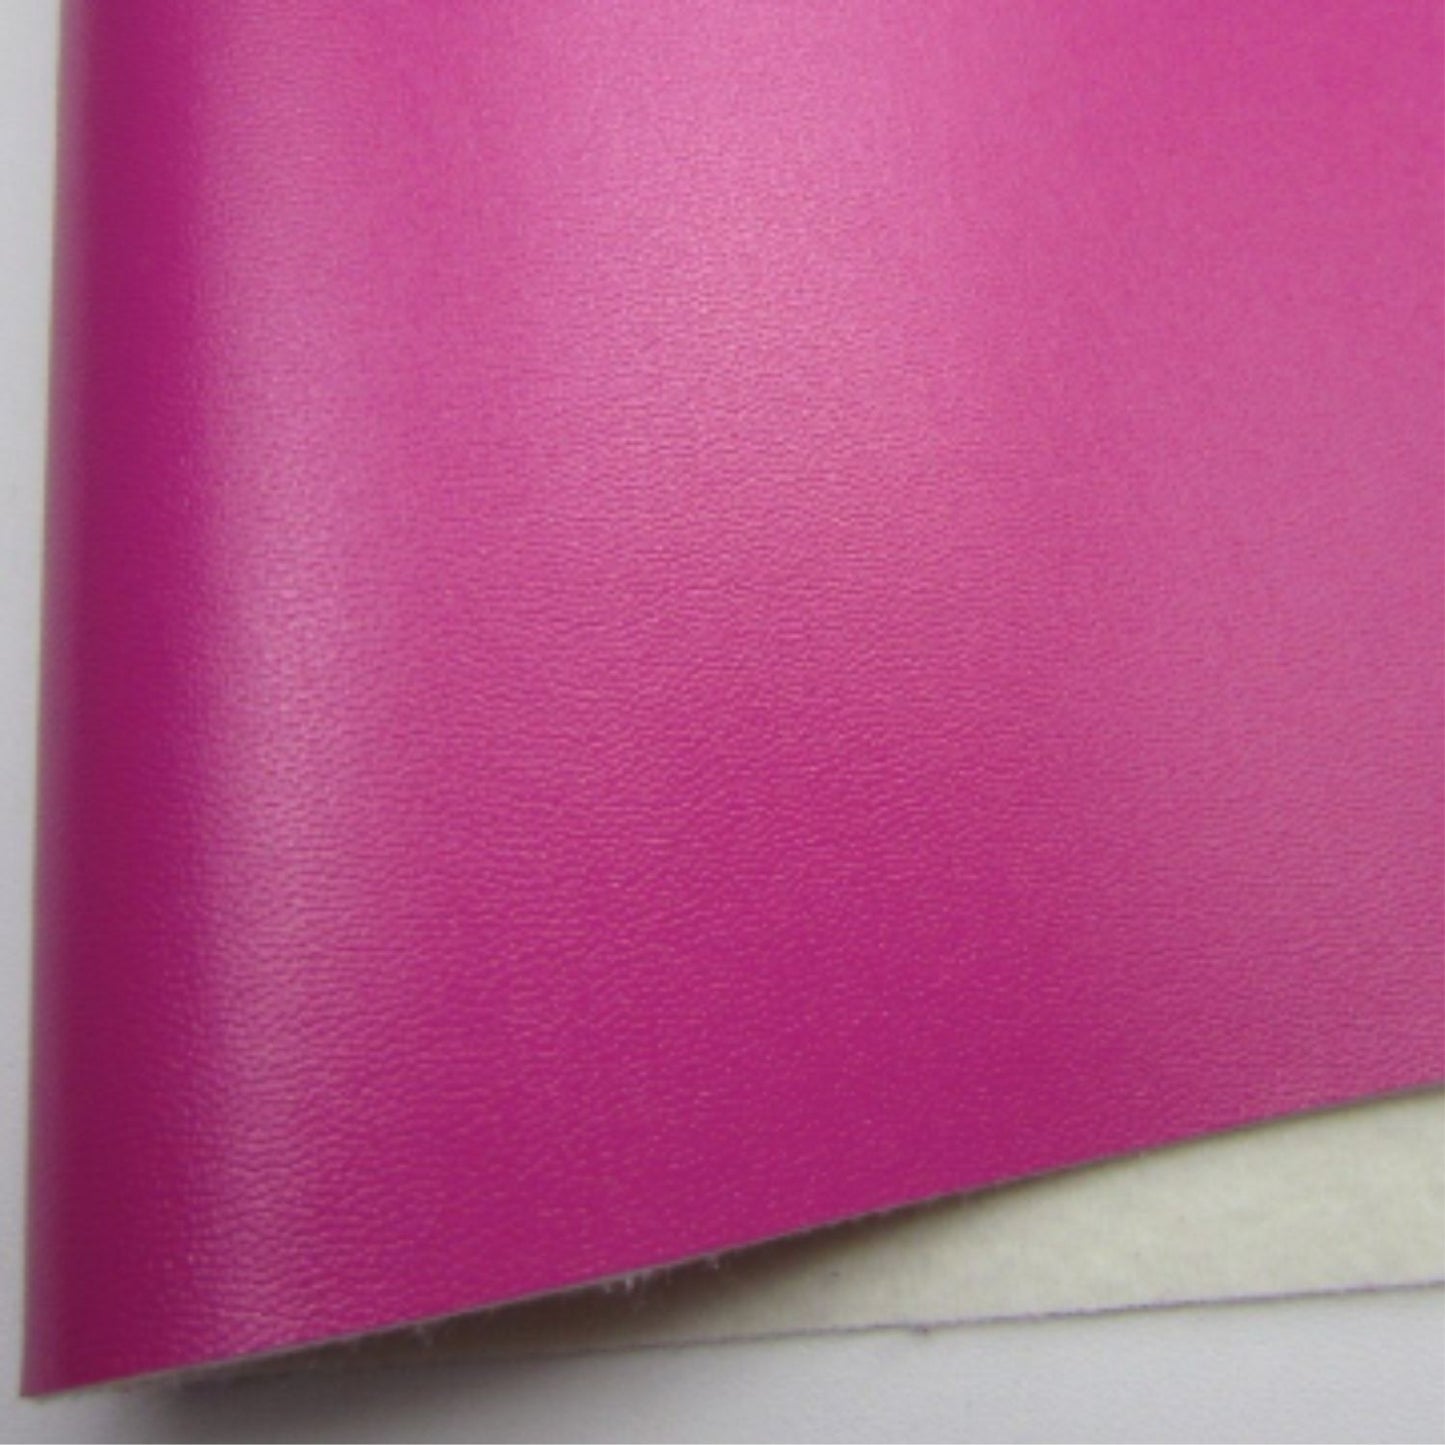 Pink Smooth Fabric Synthetic Faux PU Leather 11.75in x 12in Sheets - CraftCutterSupply.com